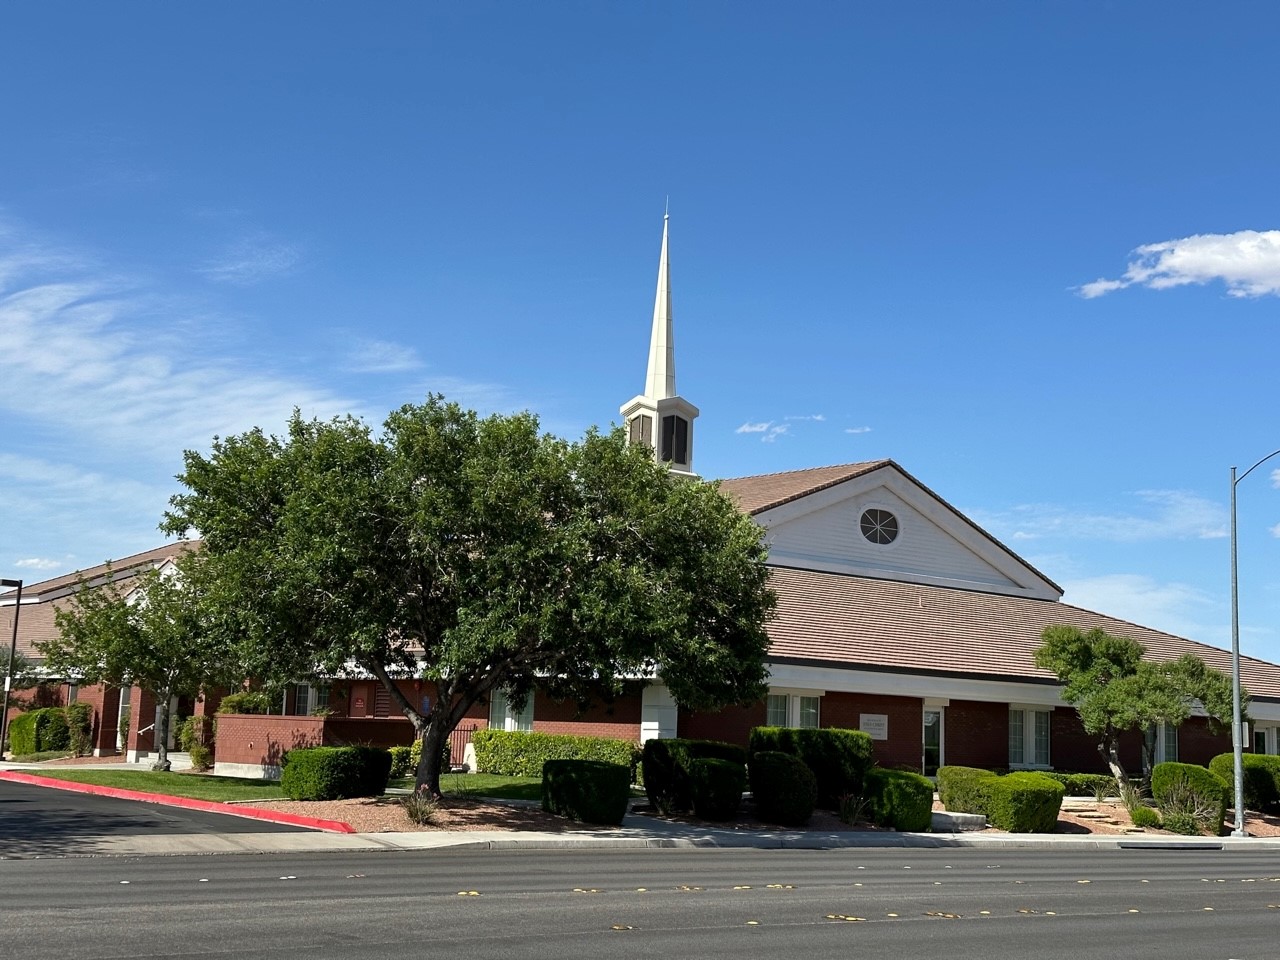 Warm Springs Stake Center of the Church of Jesus Christ of Latter-day Saints at Robindale Road and Bruce Street.